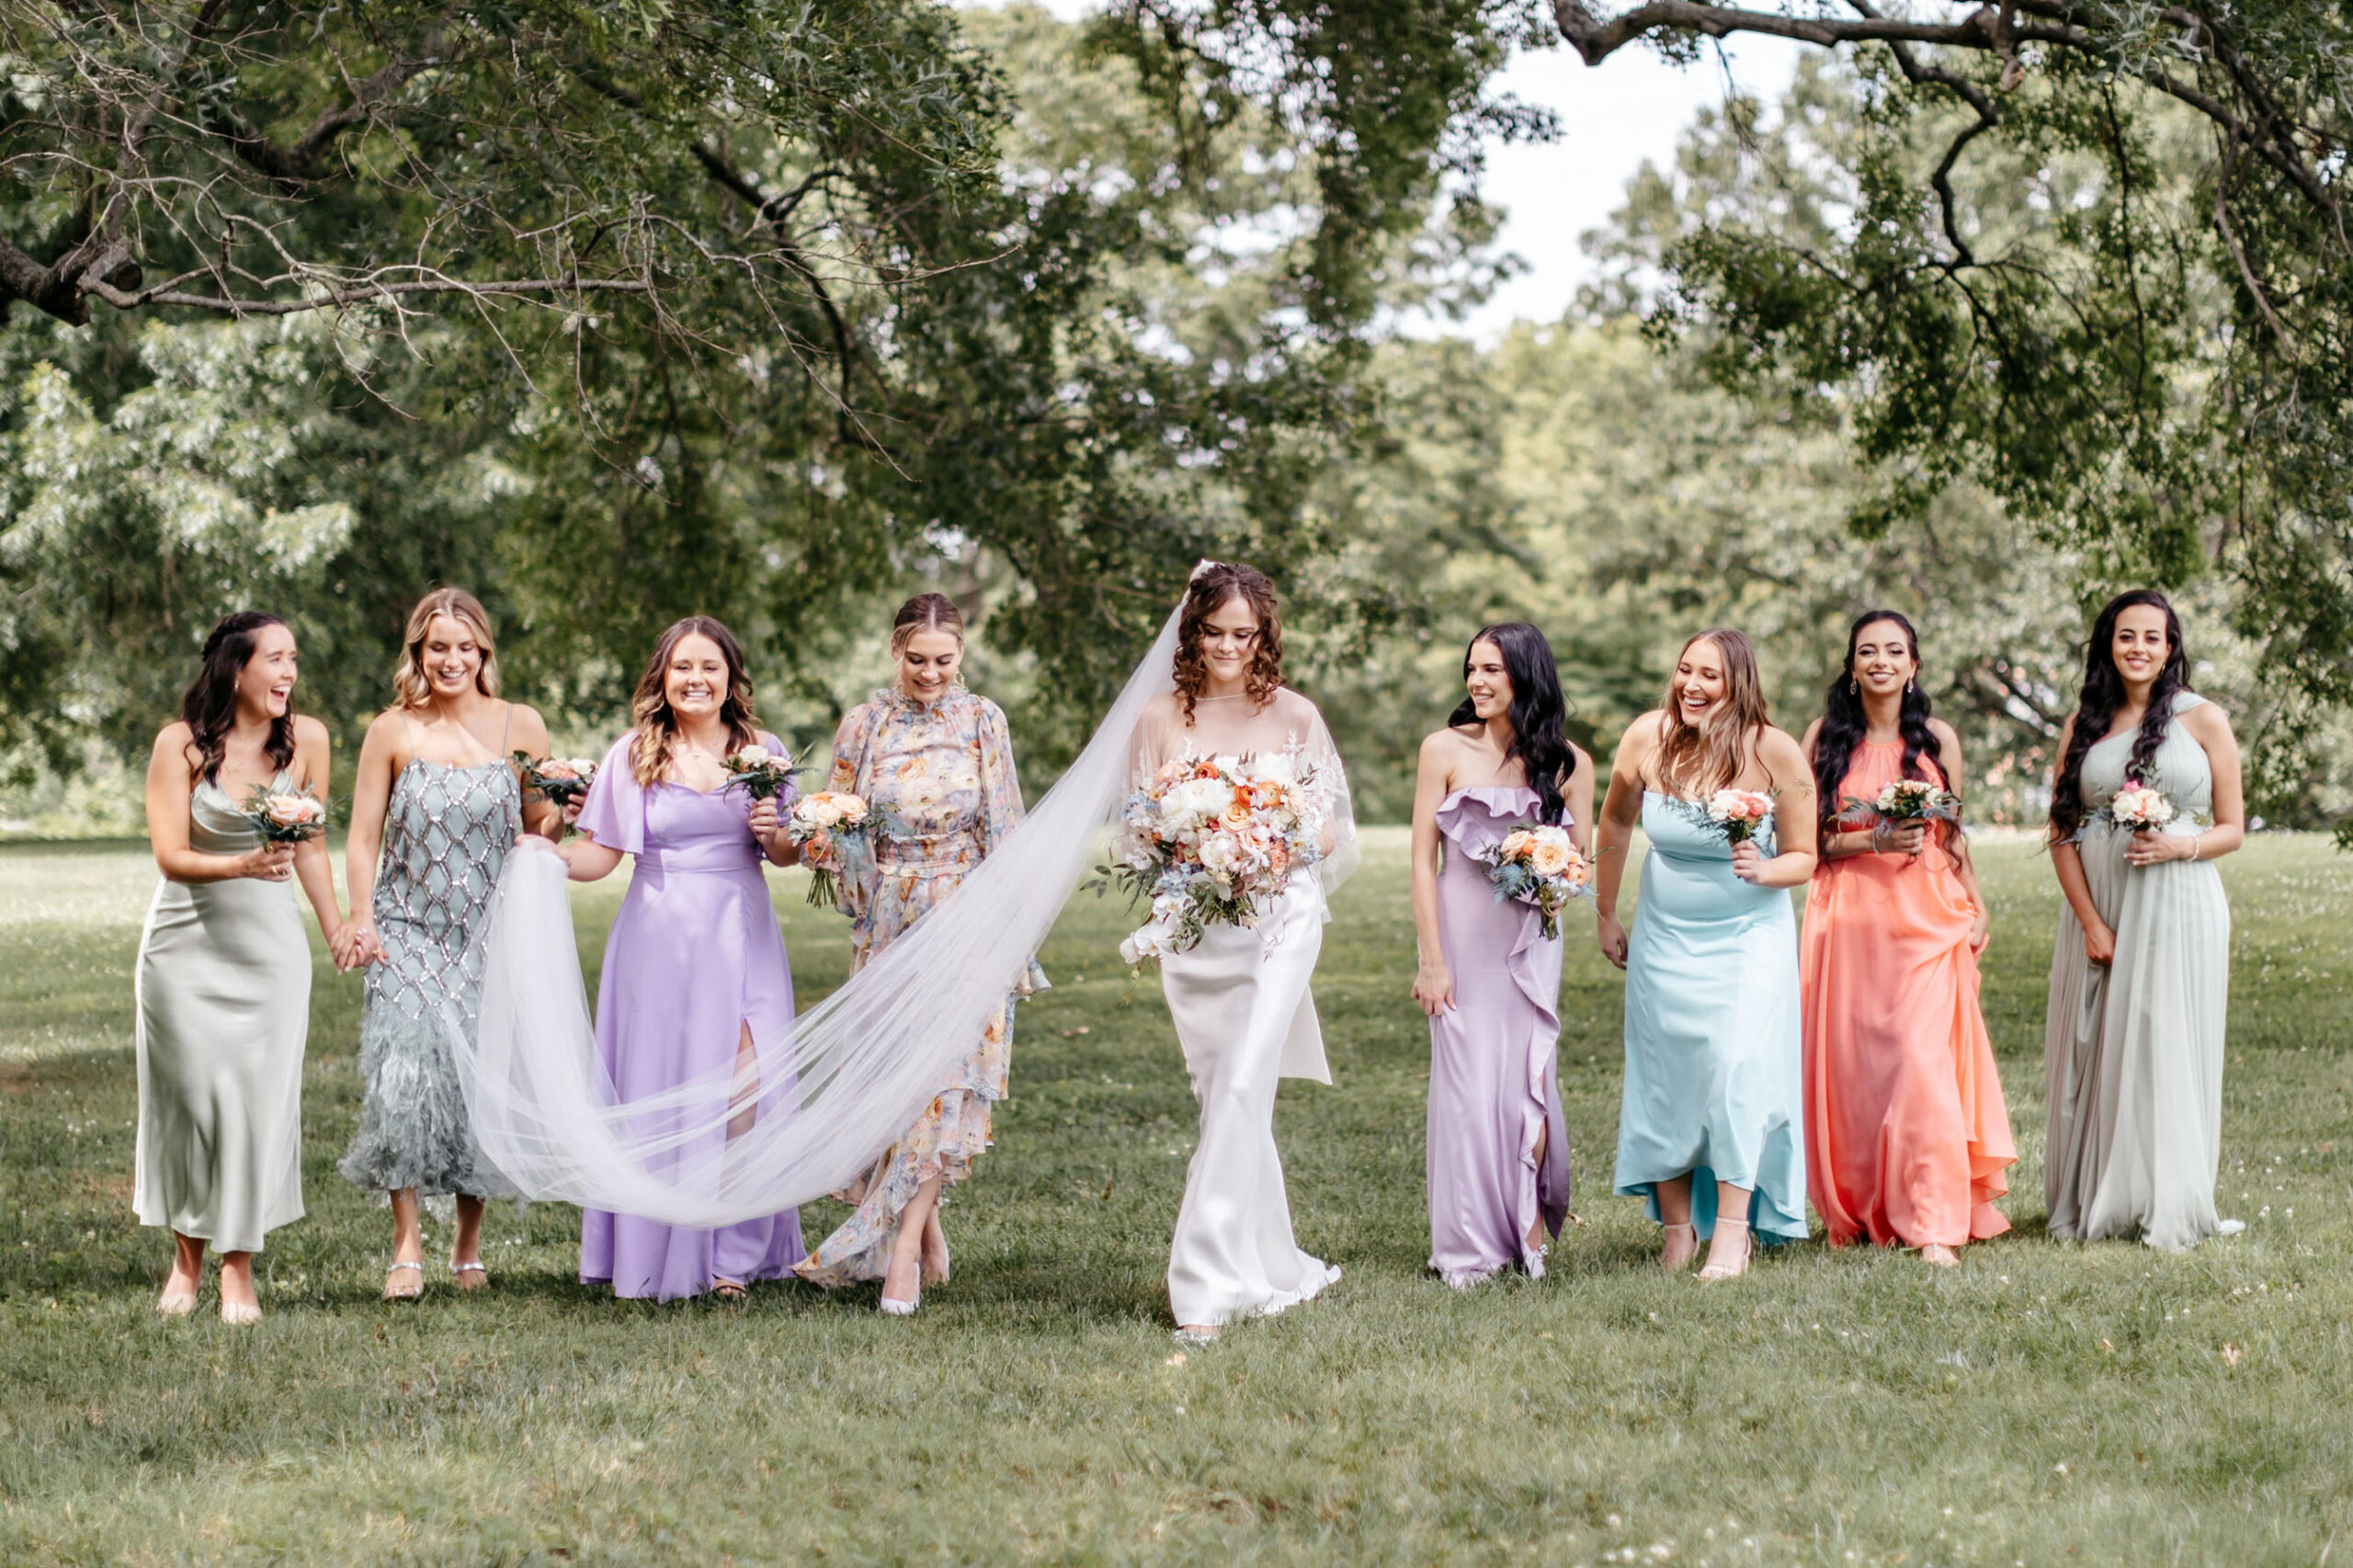 Haley and Her Bridesmaids in Pastel Dresses